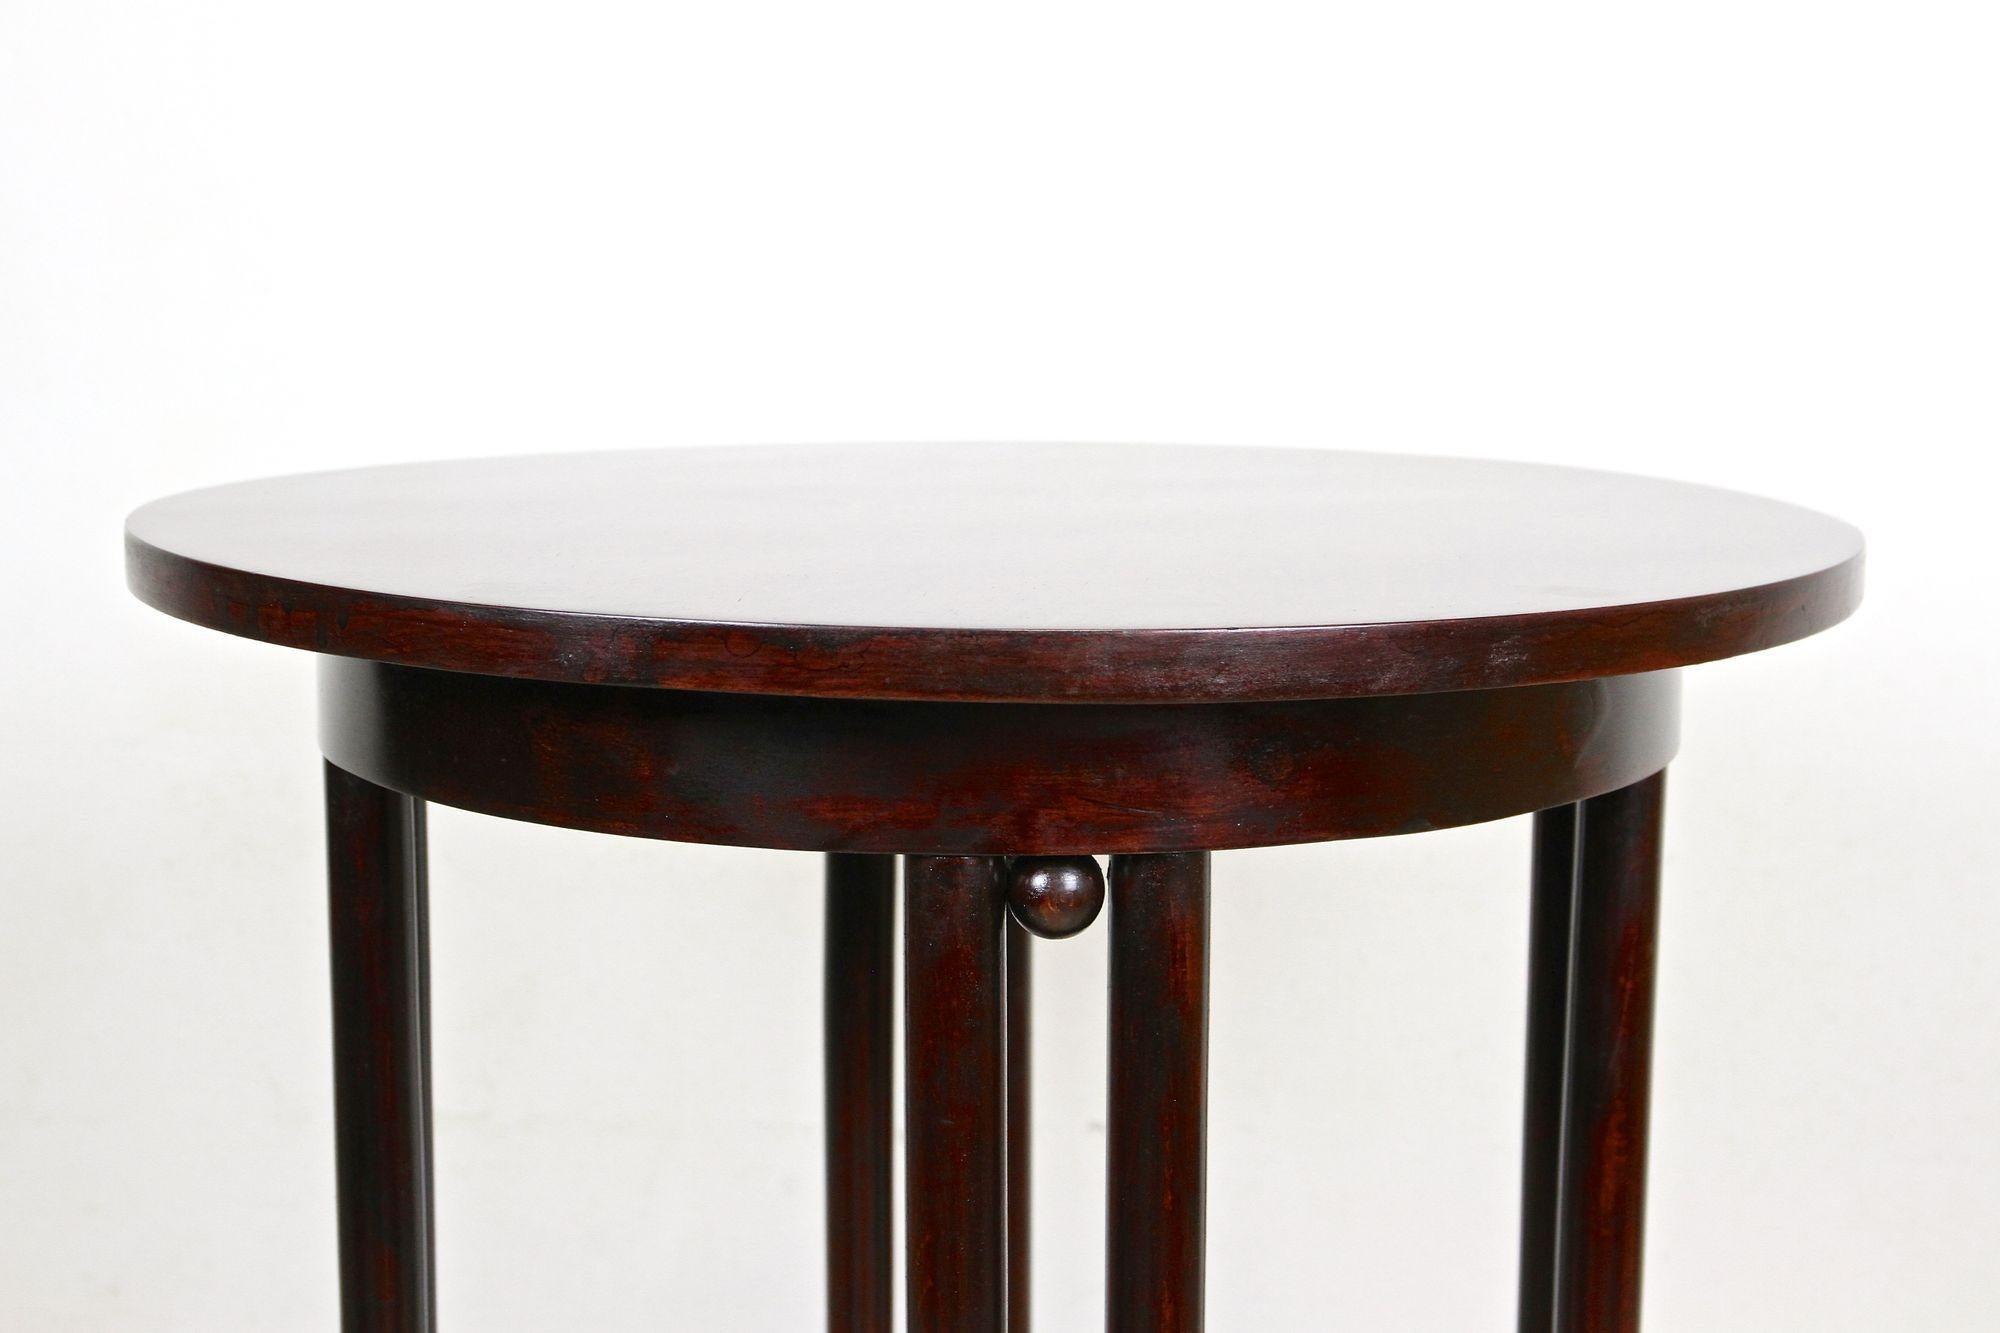 Thonet Bentwood Side Table, Design by Josef Hoffmann, Austria ca. 1906 For Sale 2